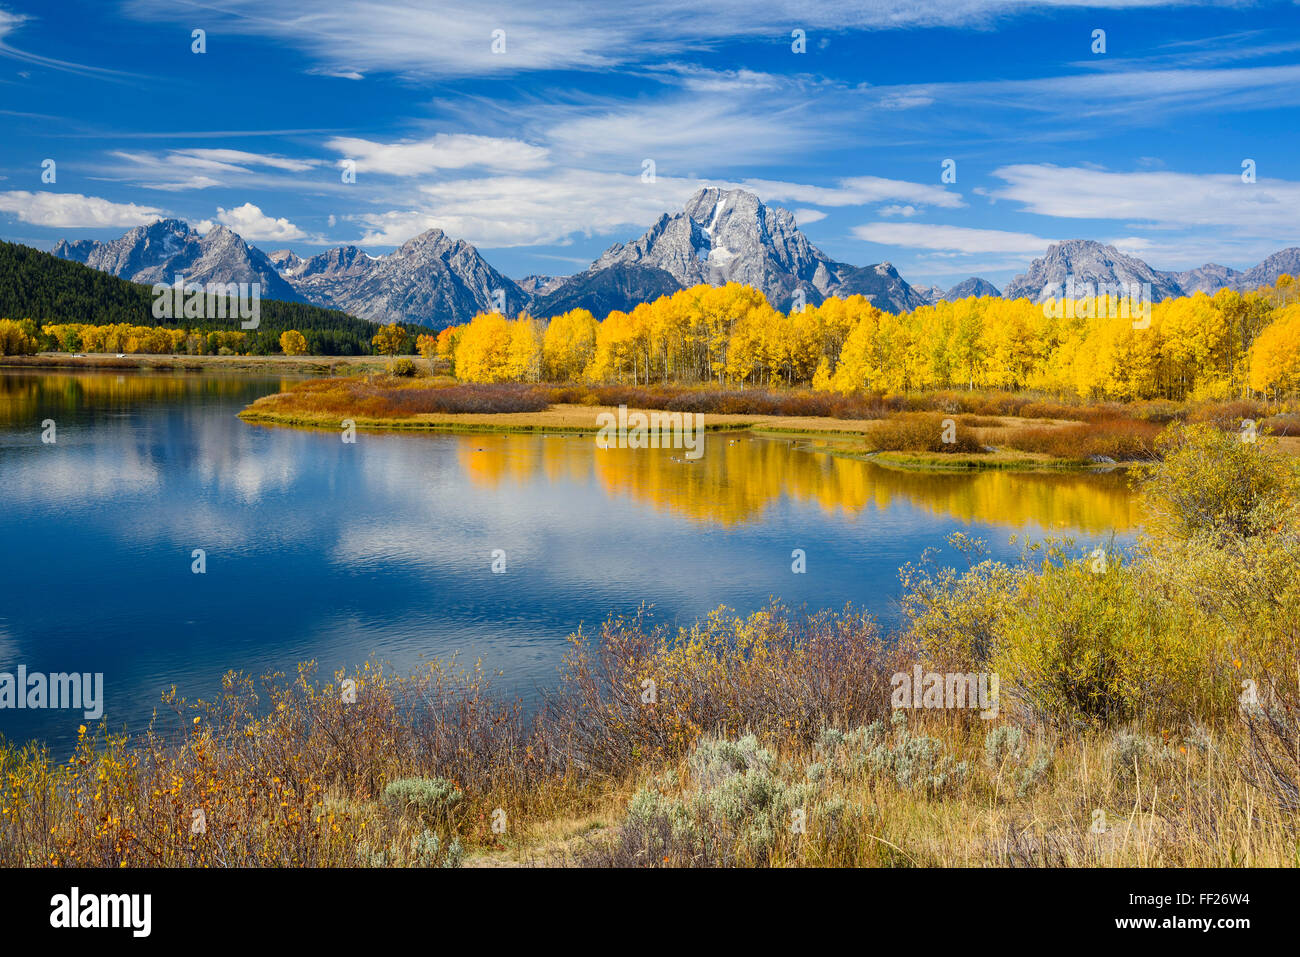 Mount Moran and the Teton Range from Oxbow Bend, Snake River, Grand Tetons NationaRM Park, Wyoming, United States of America Stock Photo